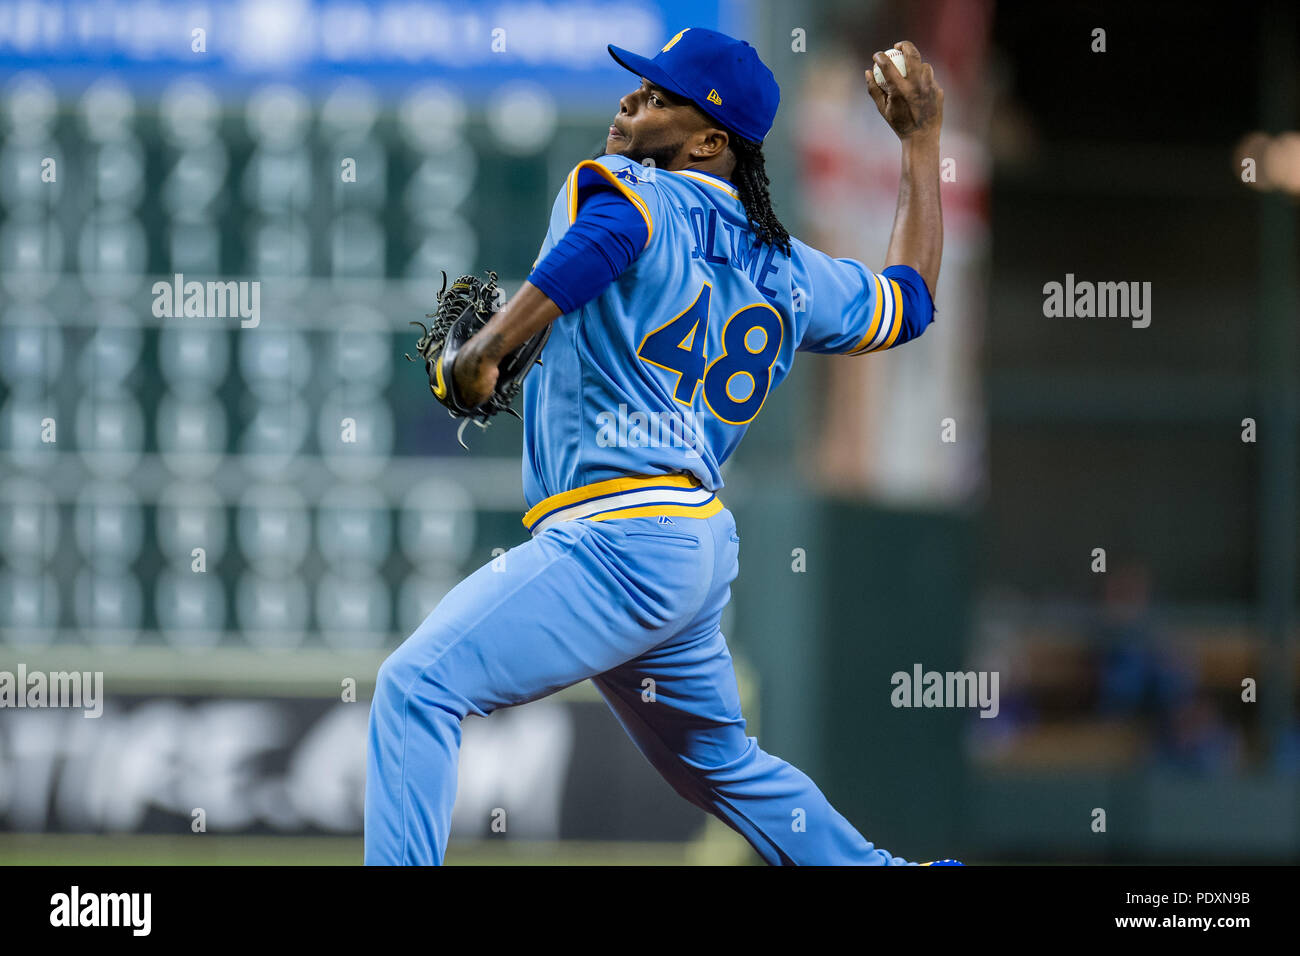 August 10, 2018: Seattle Mariners relief pitcher Alex Colome (48) pitches during a Major League Baseball game between the Houston Astros and the Seattle Mariners on 1970s night at Minute Maid Park in Houston, TX. The Mariners won the game 5 to 2.Trask Smith/CSM Stock Photo